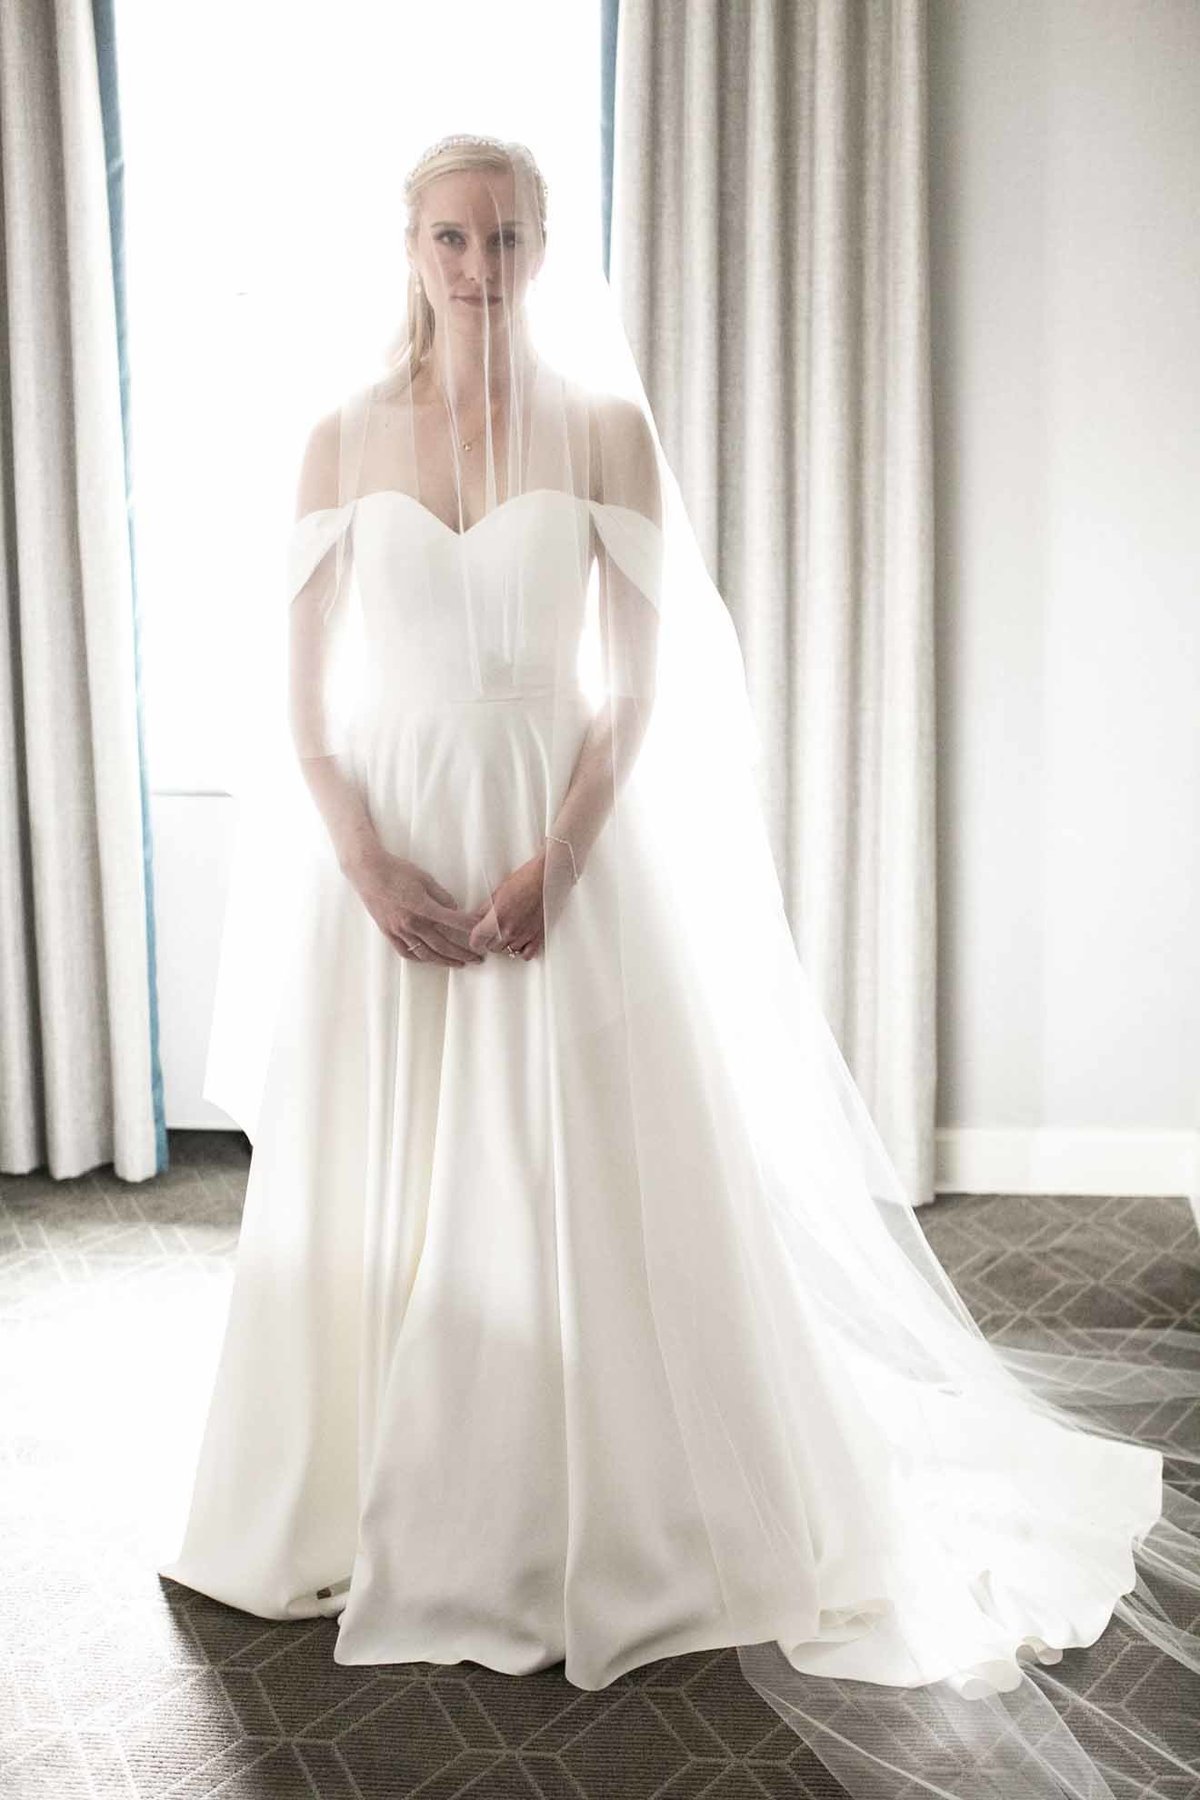 Seattle bride in long white vail and white silk wedding dress